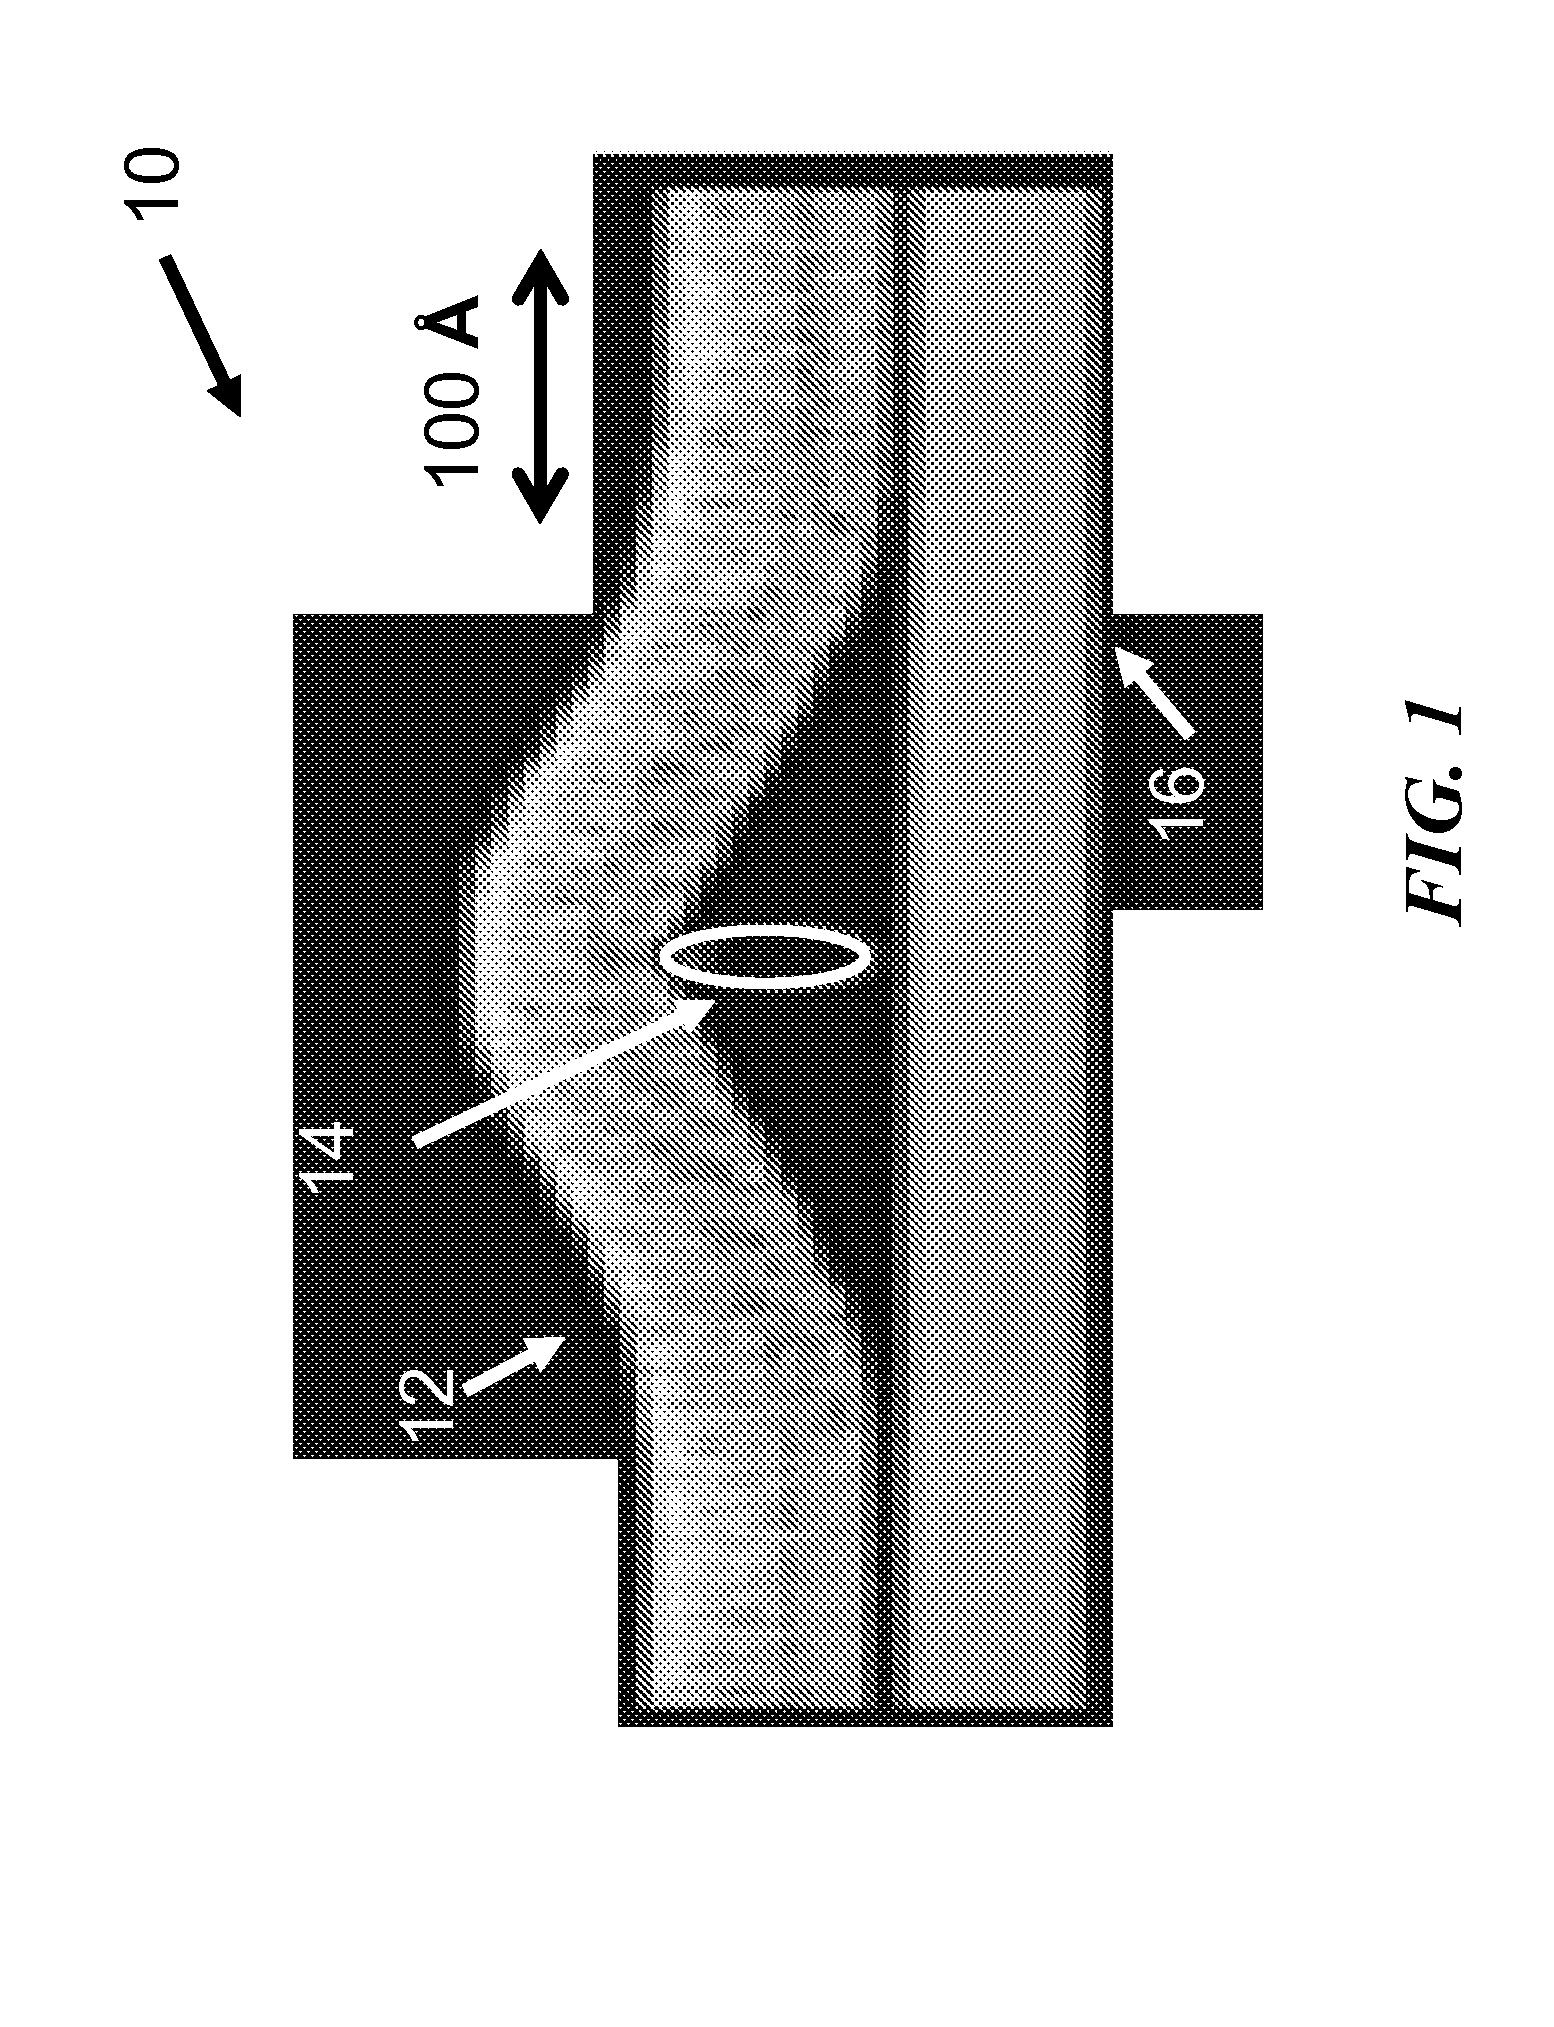 Method and system for improving conductivity of nanotube nets and related materials